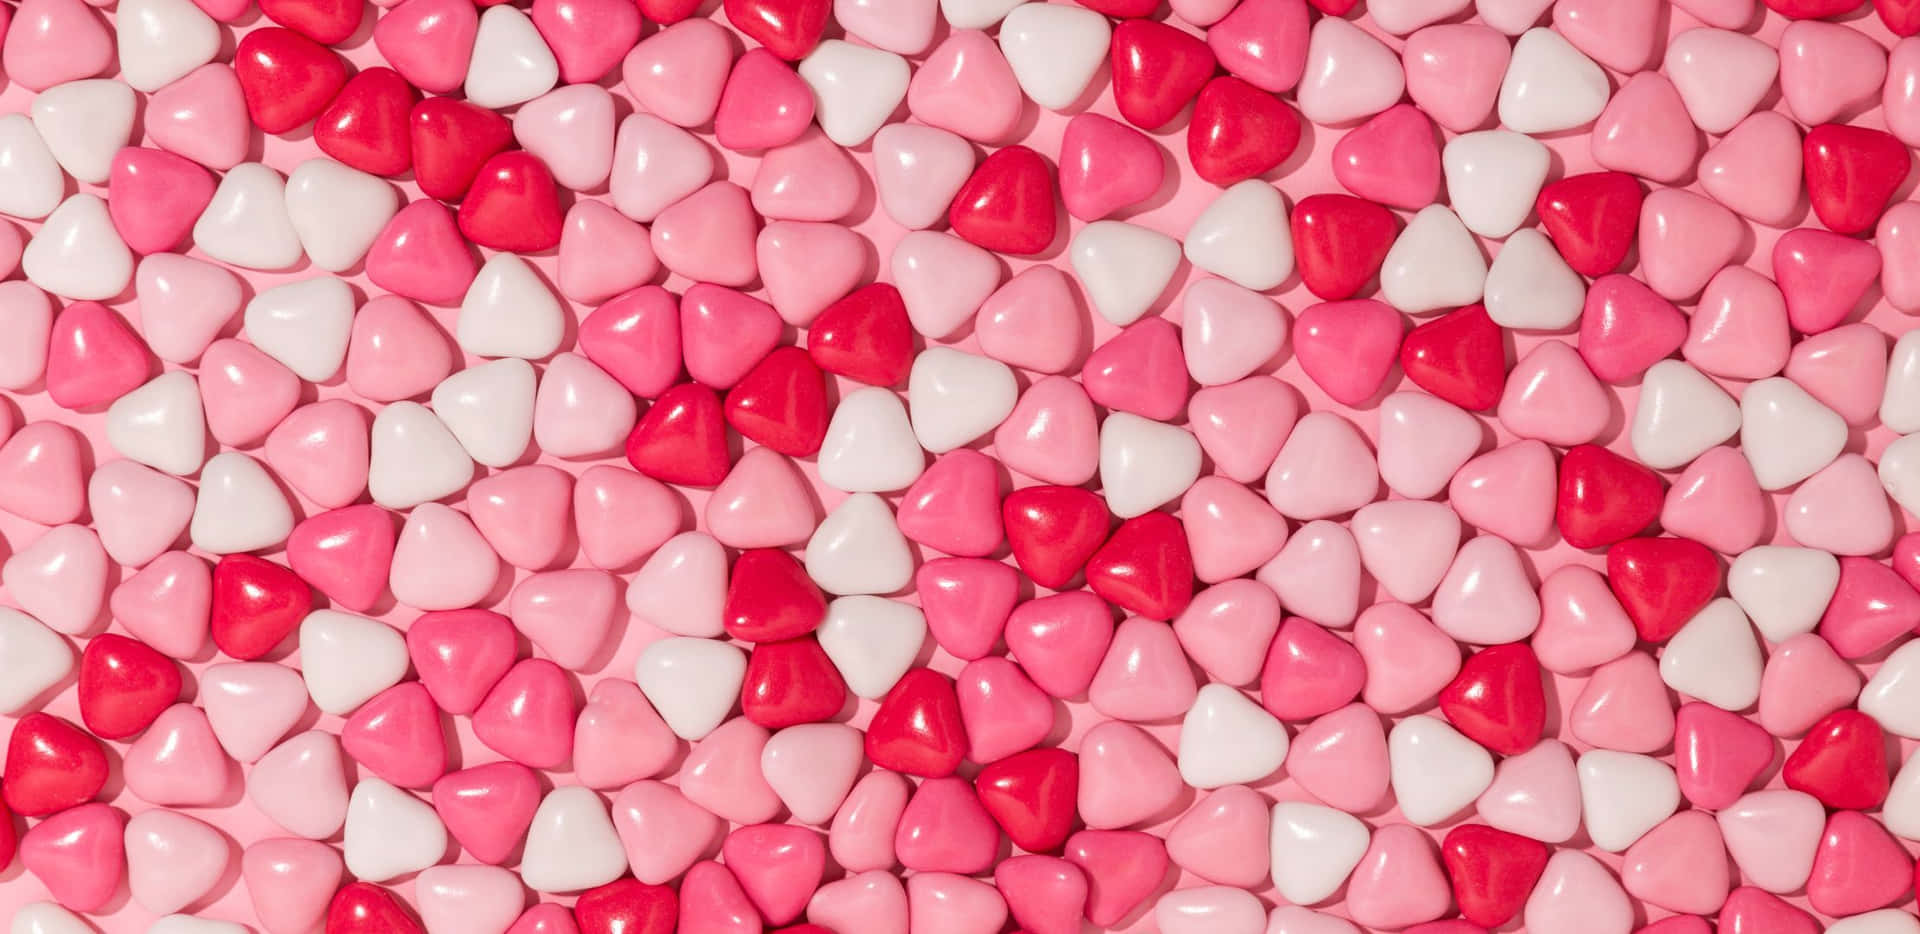 Pink And White Pebbles On A Wall Wallpaper